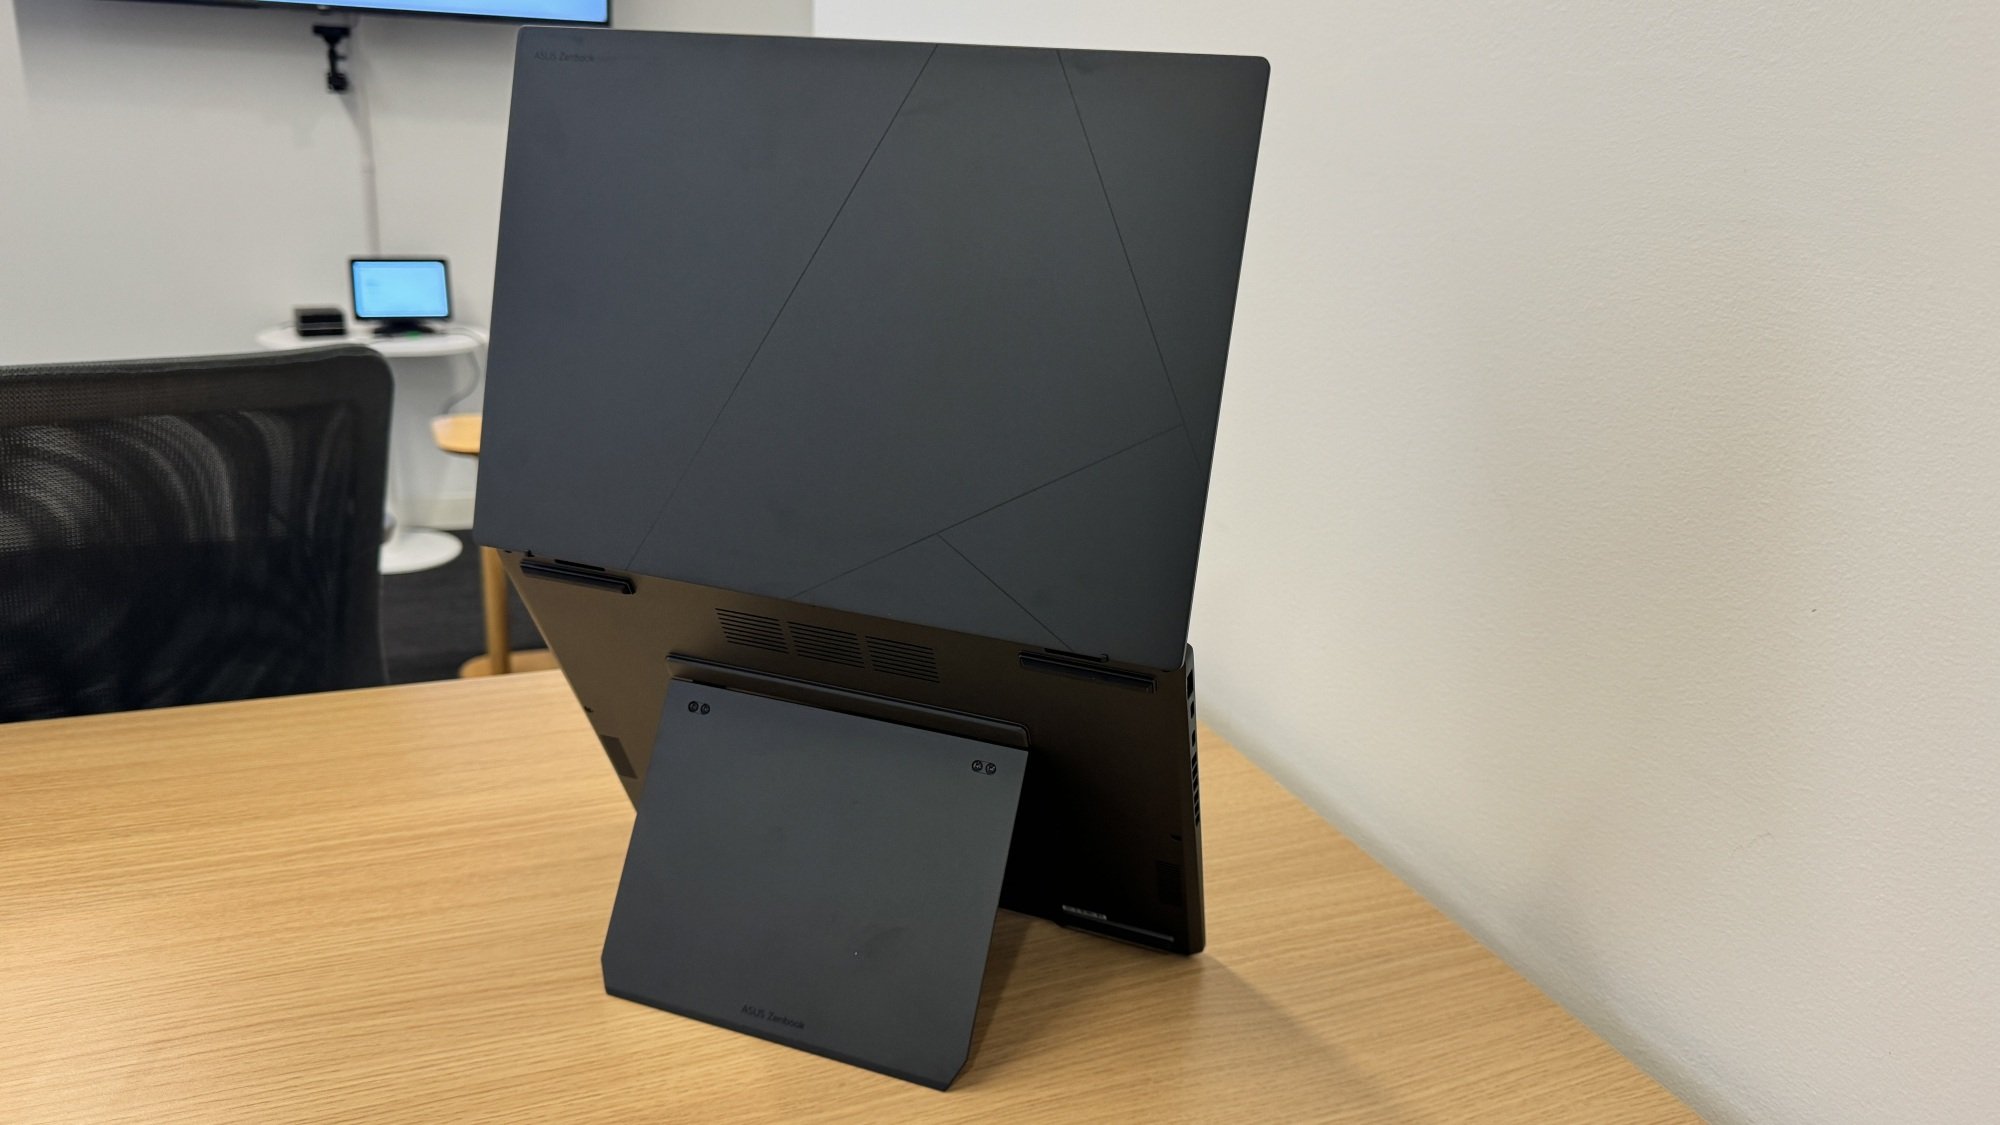 Asus Zenbook Duo's kickstand while propped up on a table